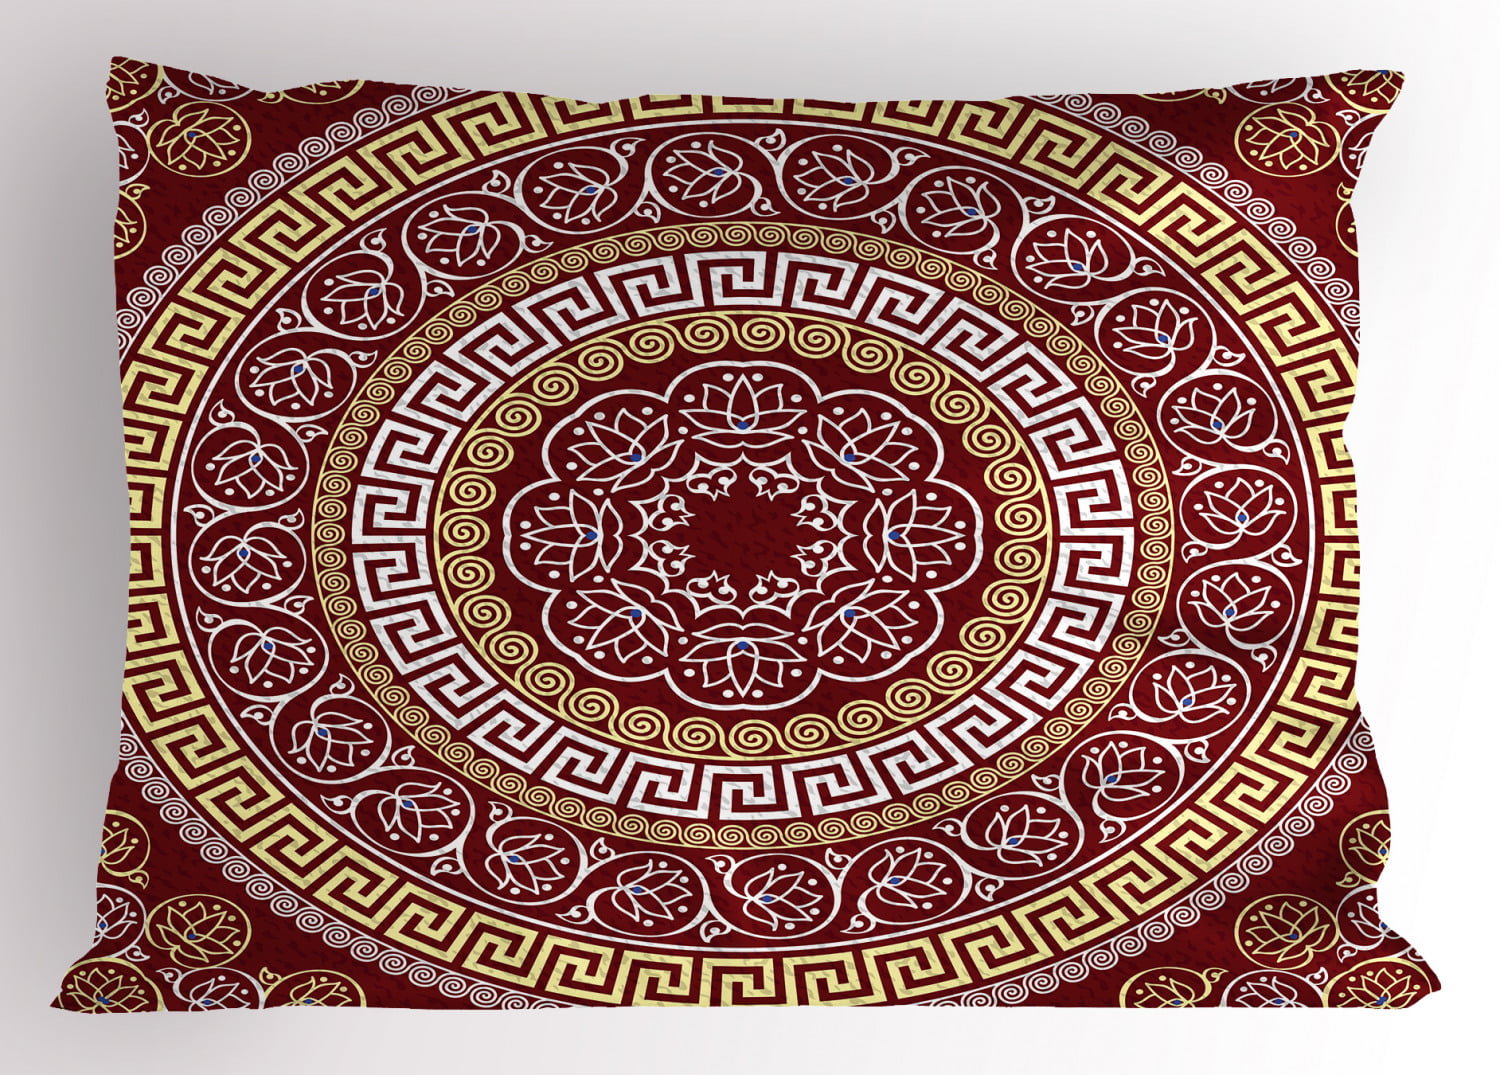 Meandered Pattern 2Pcs Cushion Cover Set - Cotton Circle